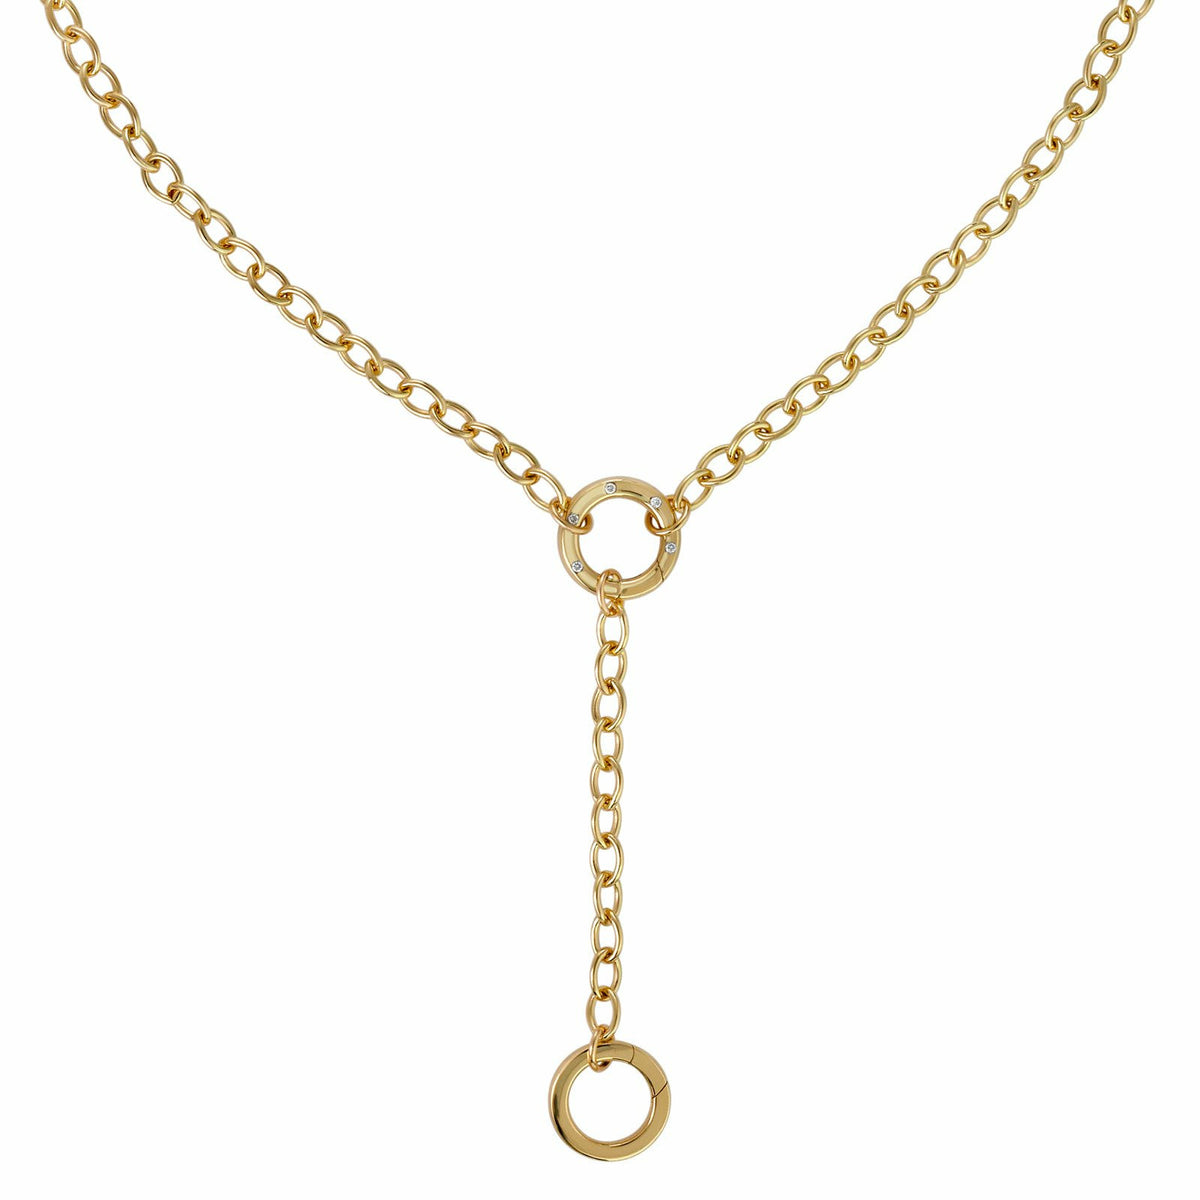 4.8mm Gold Double Hinge Chain